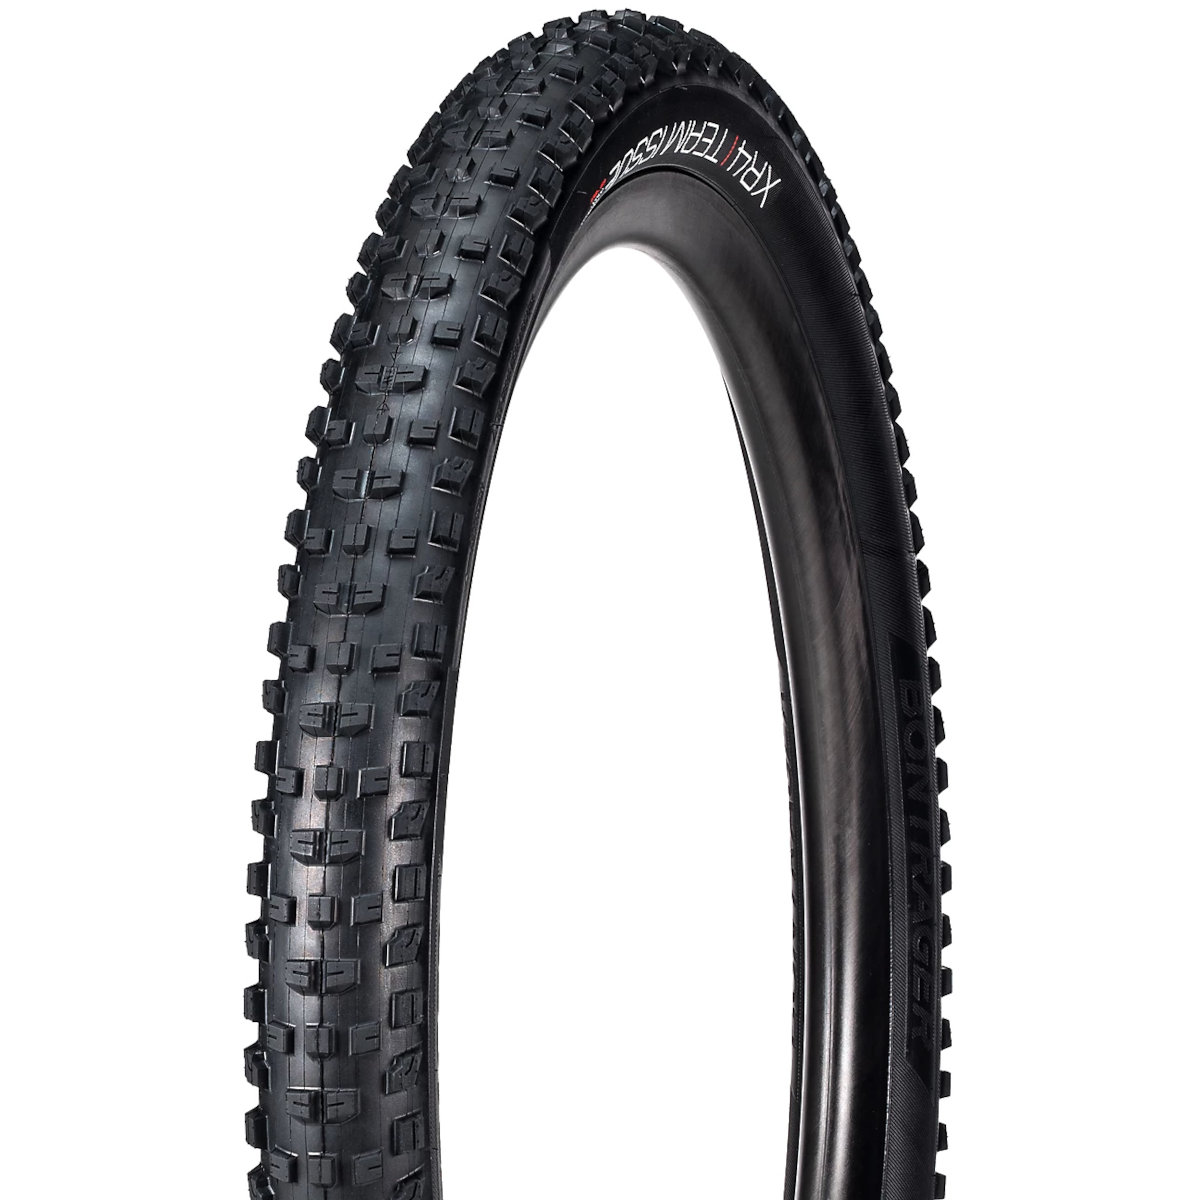 Image of Bontrager XR4 Team Issue TLR Folding Tire - 27.5x2.6 Inches